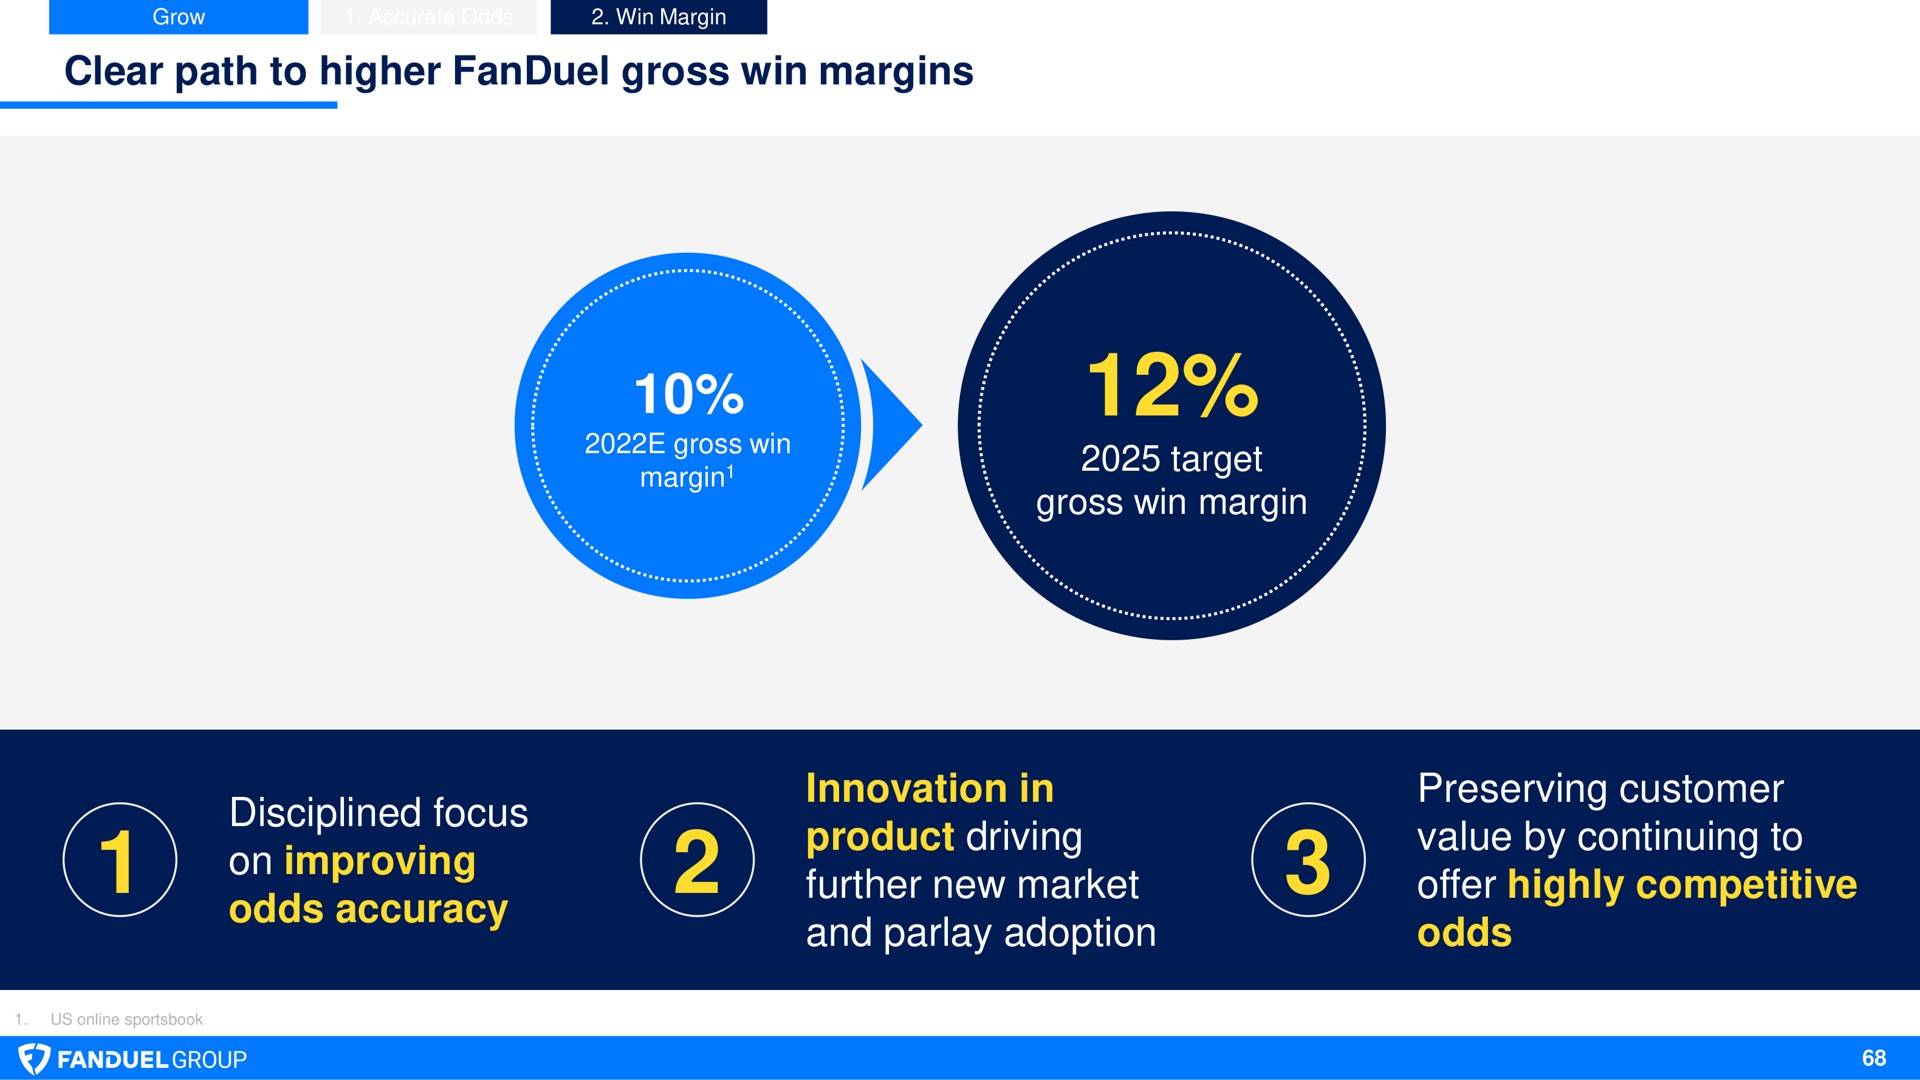 clear path to higher gross win margins target gross win margin disciplined focus on improving odds accuracy innovation in product driving further new market and parlay adoption preserving customer value by continuing to offer highly competitive odds came coxs pat area a | Flutter